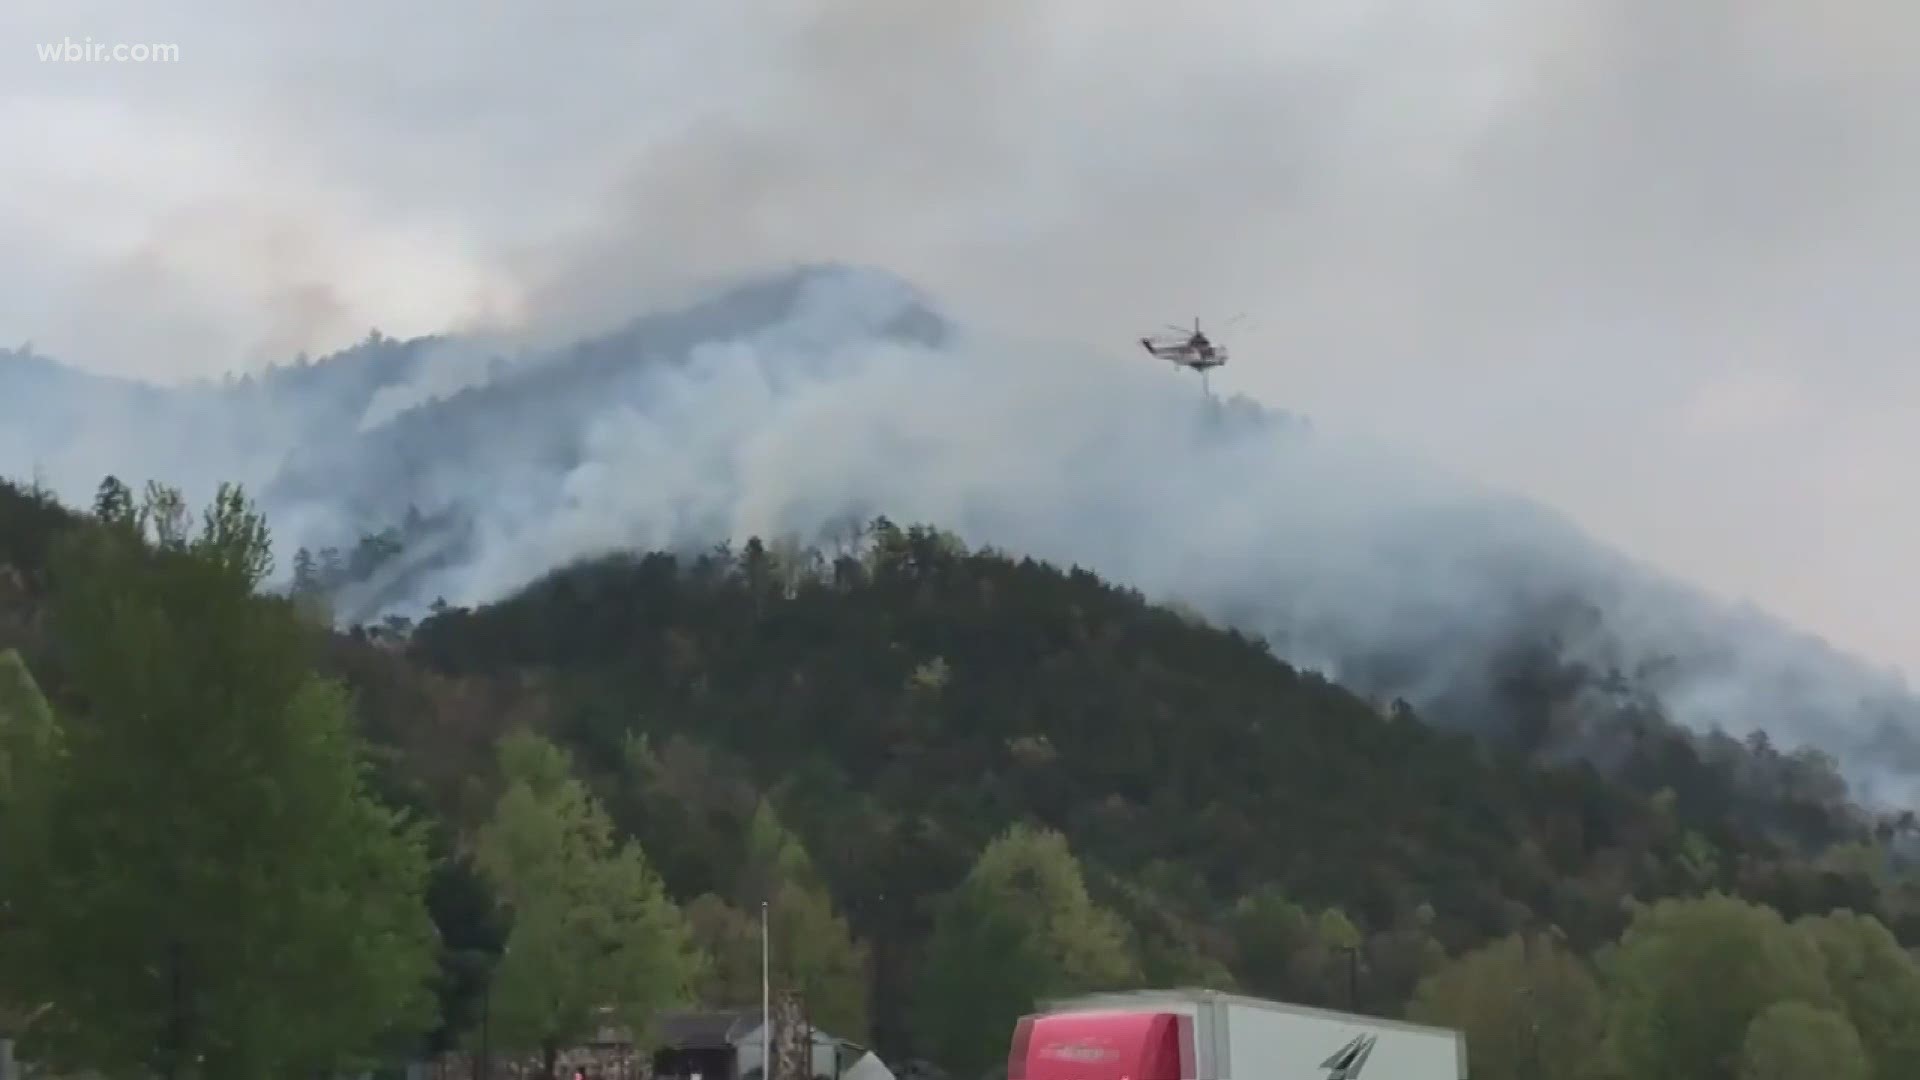 Cherokee National Forest officials said around 1,400 acres have burned in East Tennessee wildfires over the last three days.